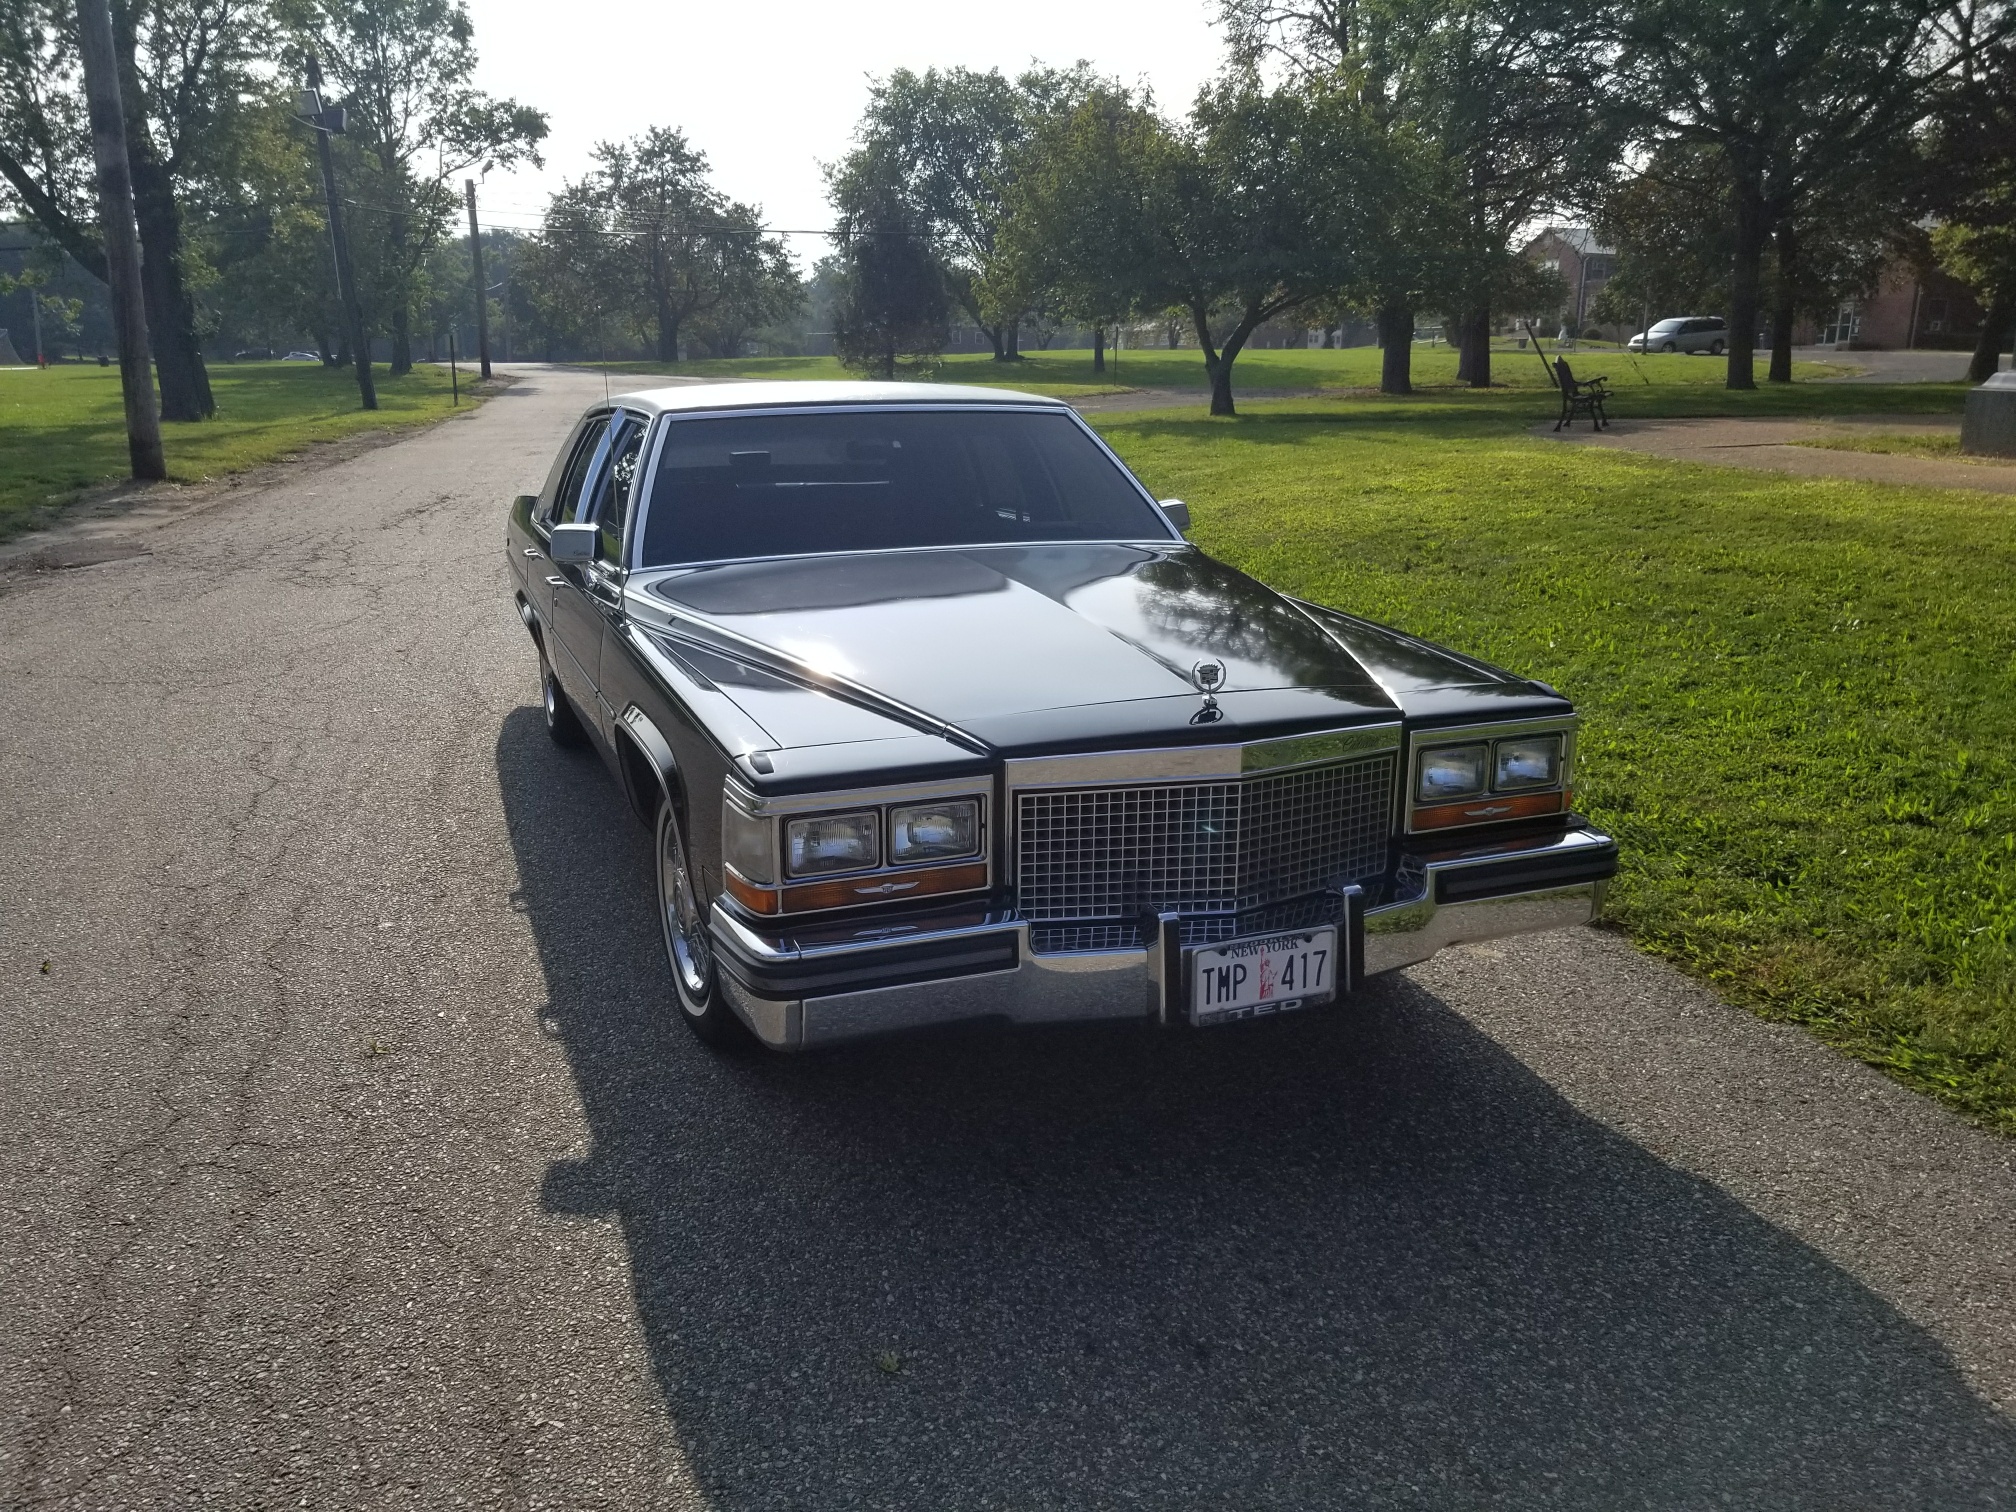 1987 Cadillac Brougham Veloce Picture Cars